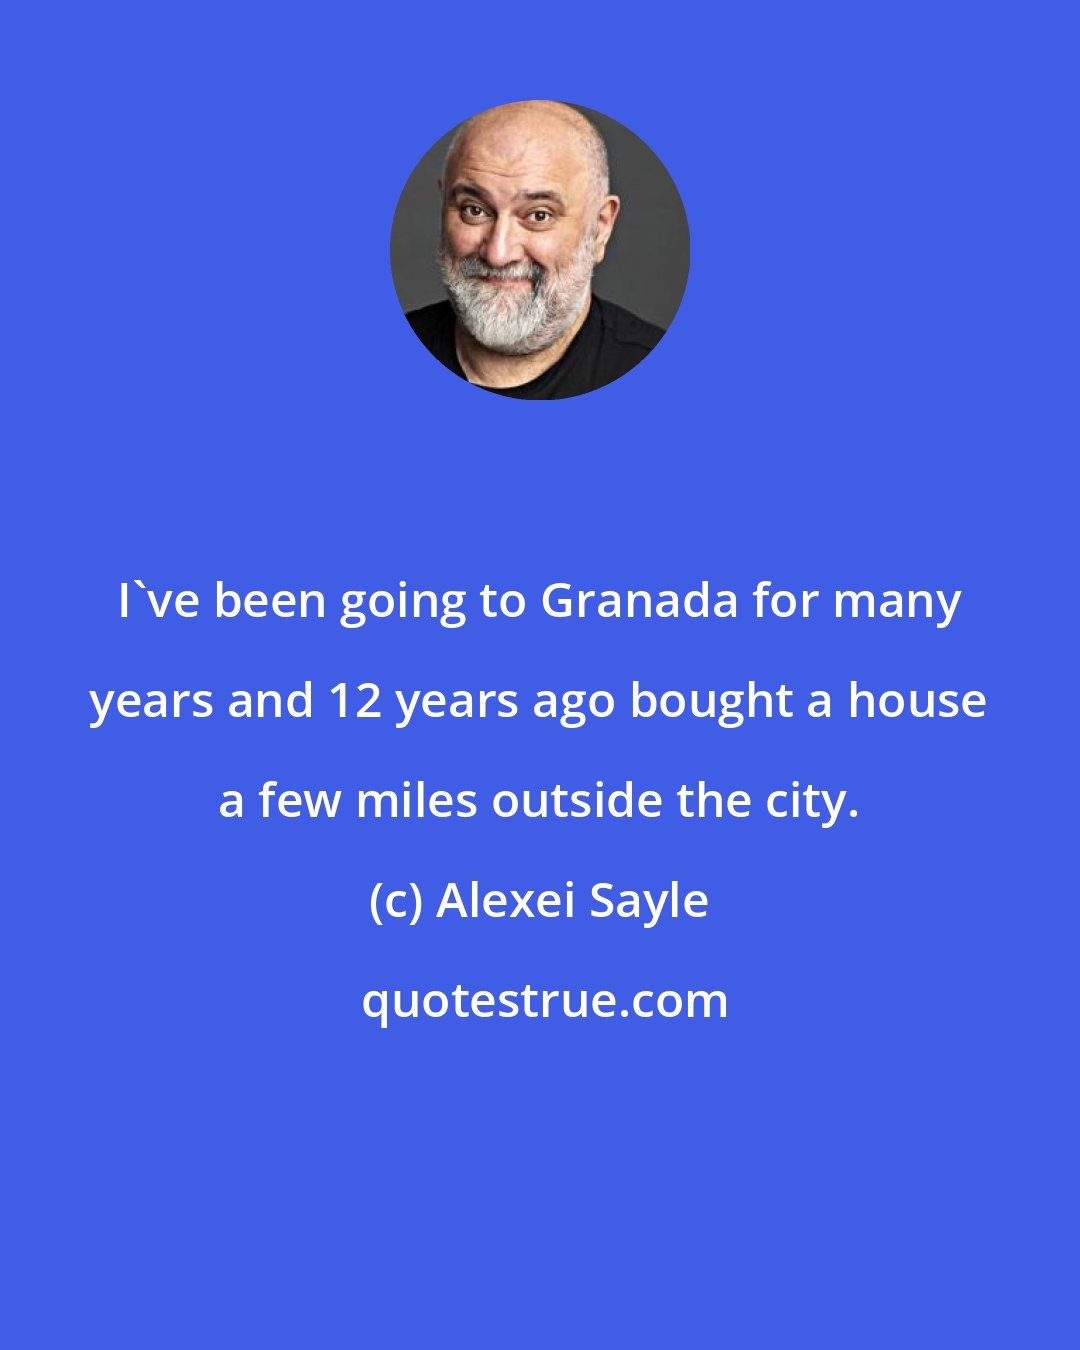 Alexei Sayle: I've been going to Granada for many years and 12 years ago bought a house a few miles outside the city.